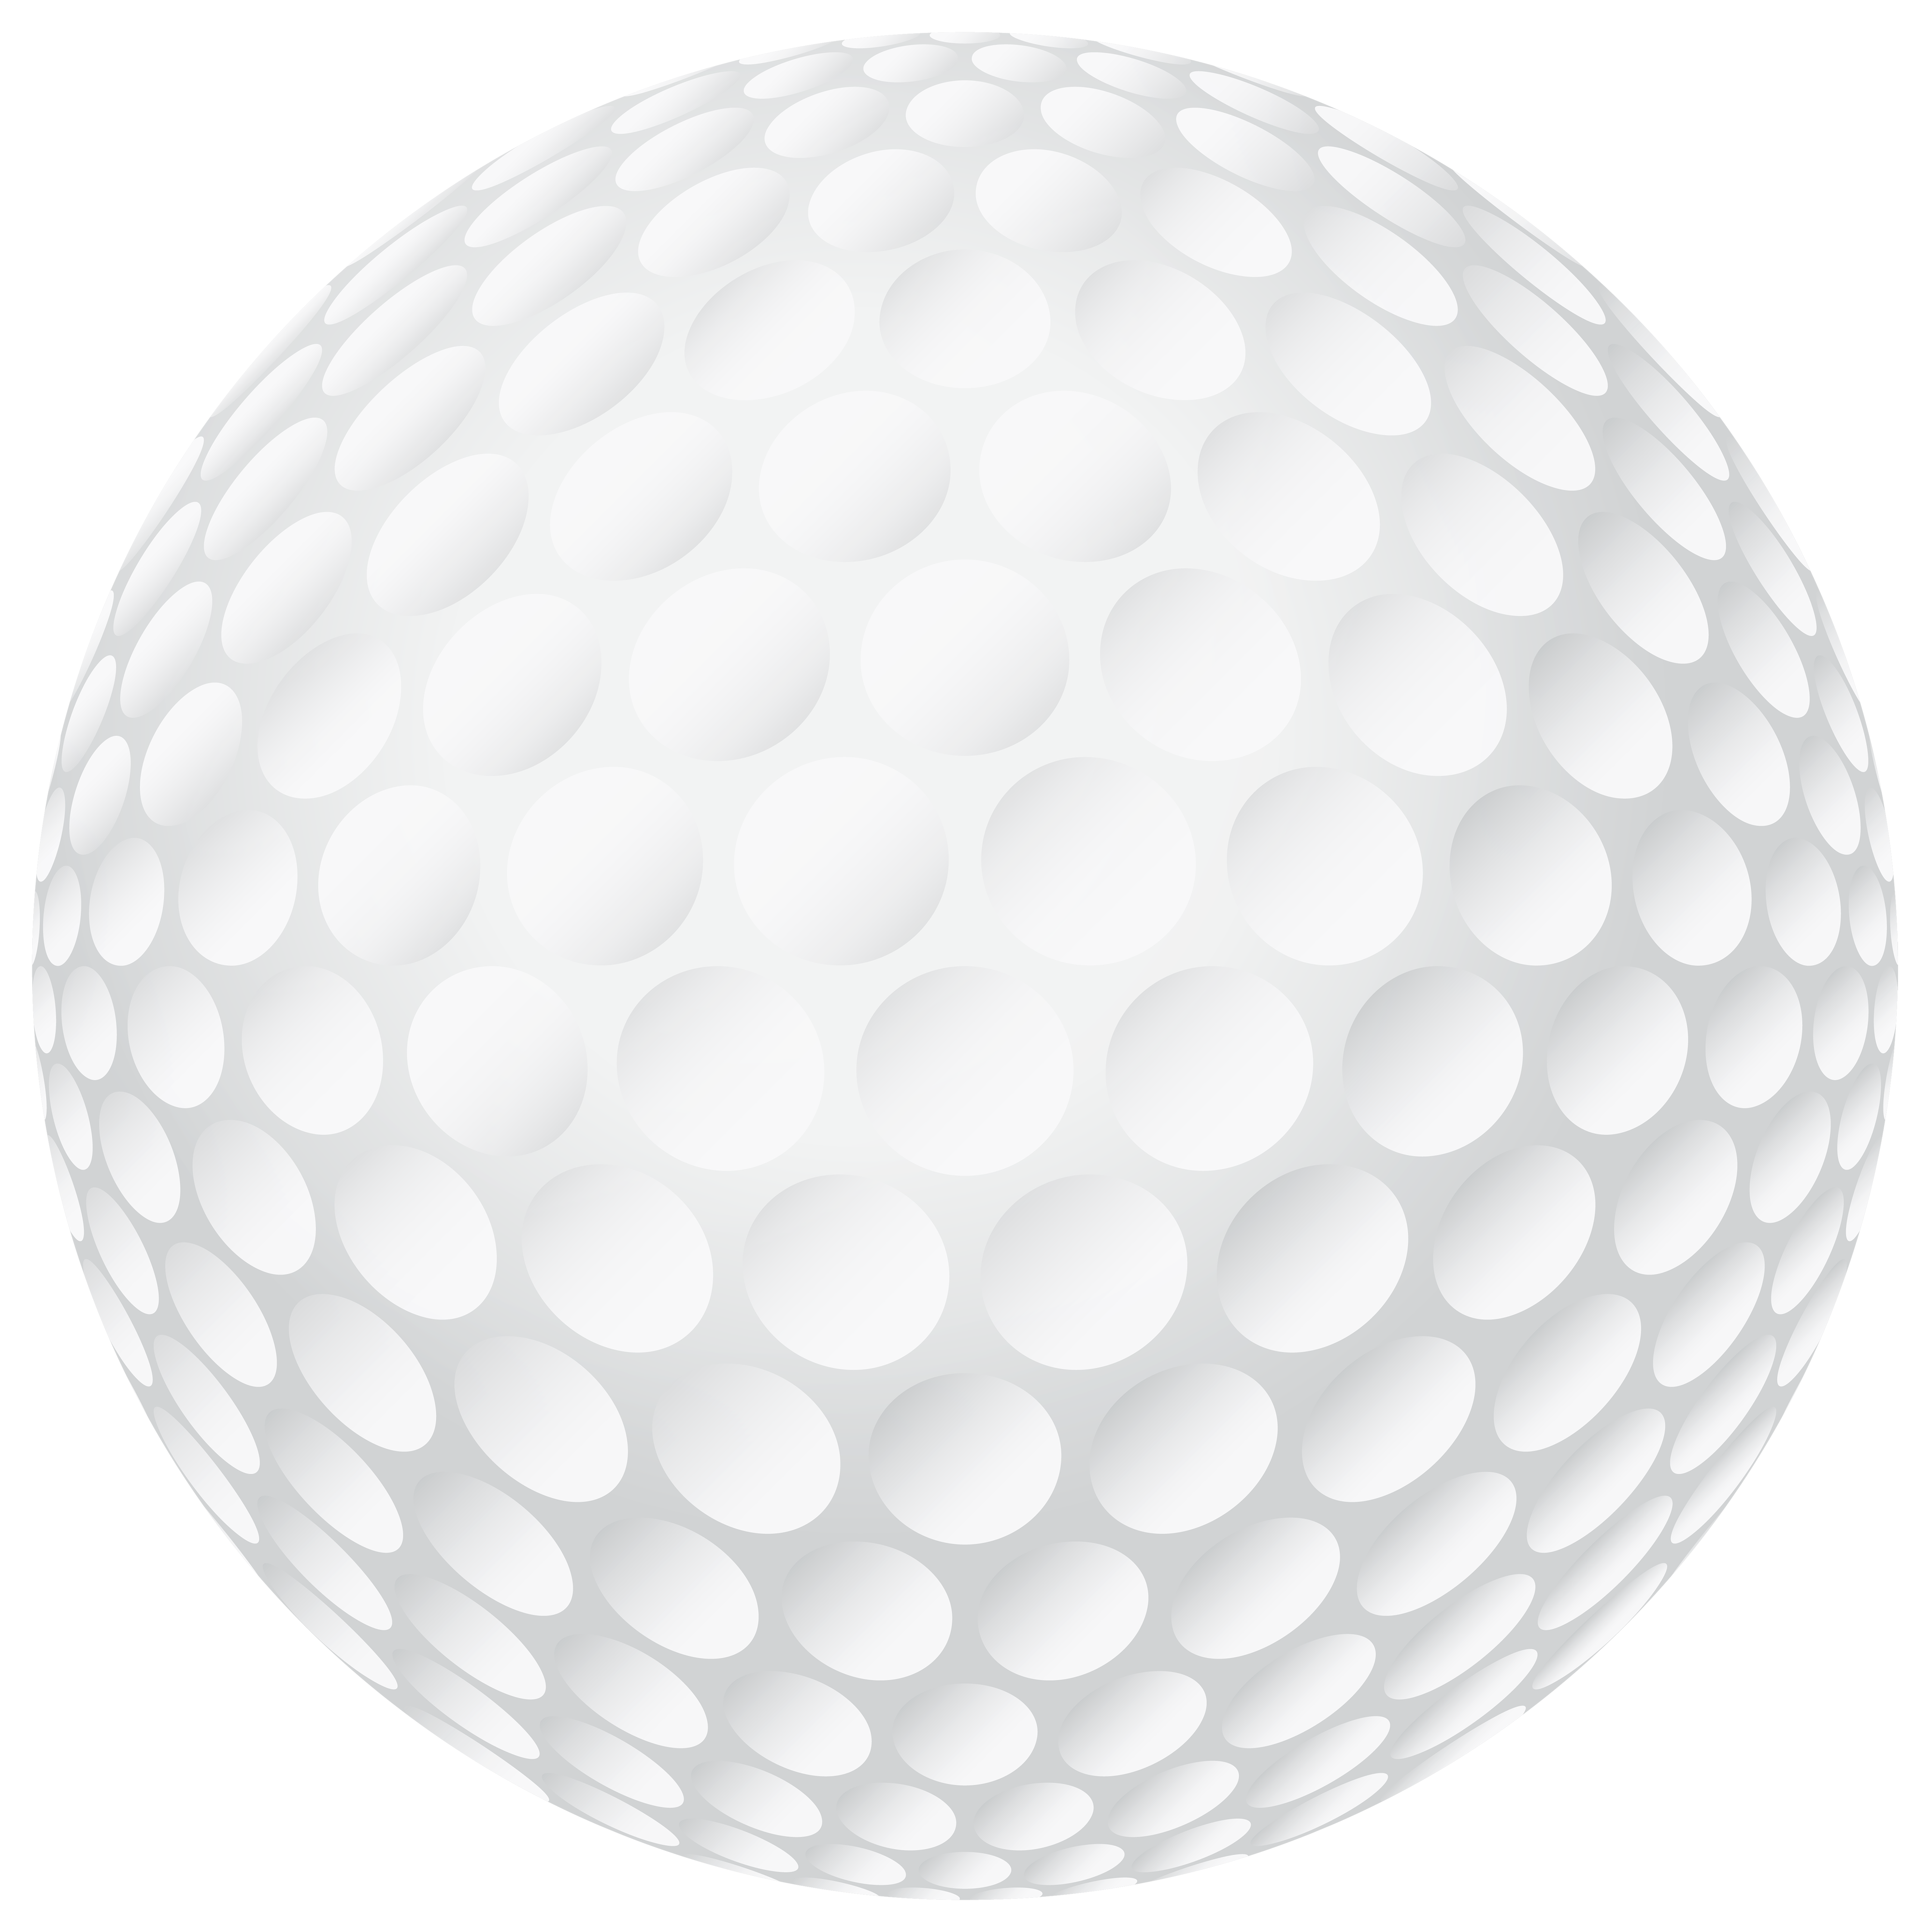 pictures of golf balls clipart - photo #48